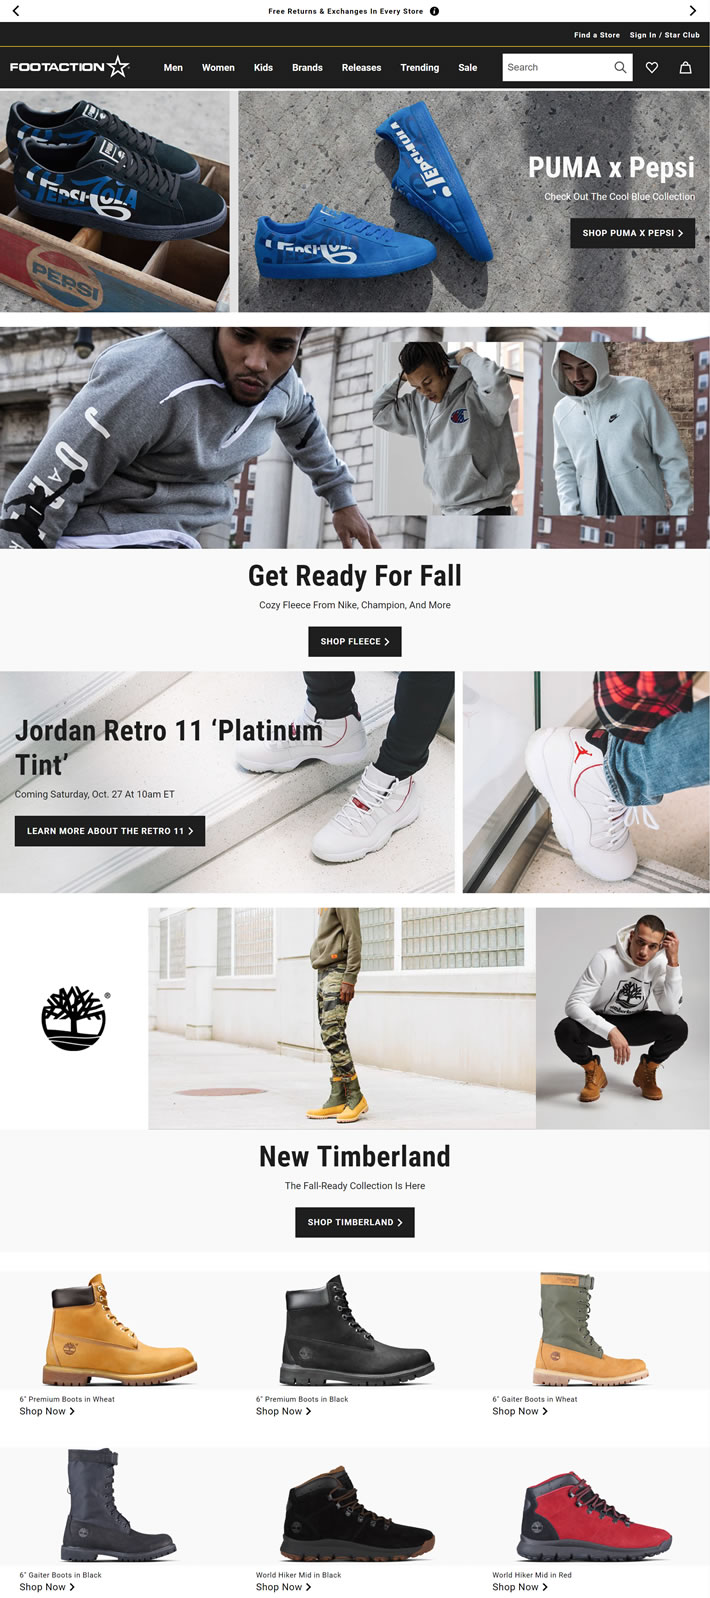 American Casual Shoes, Sneakers & Clothing Retailers: Footaction